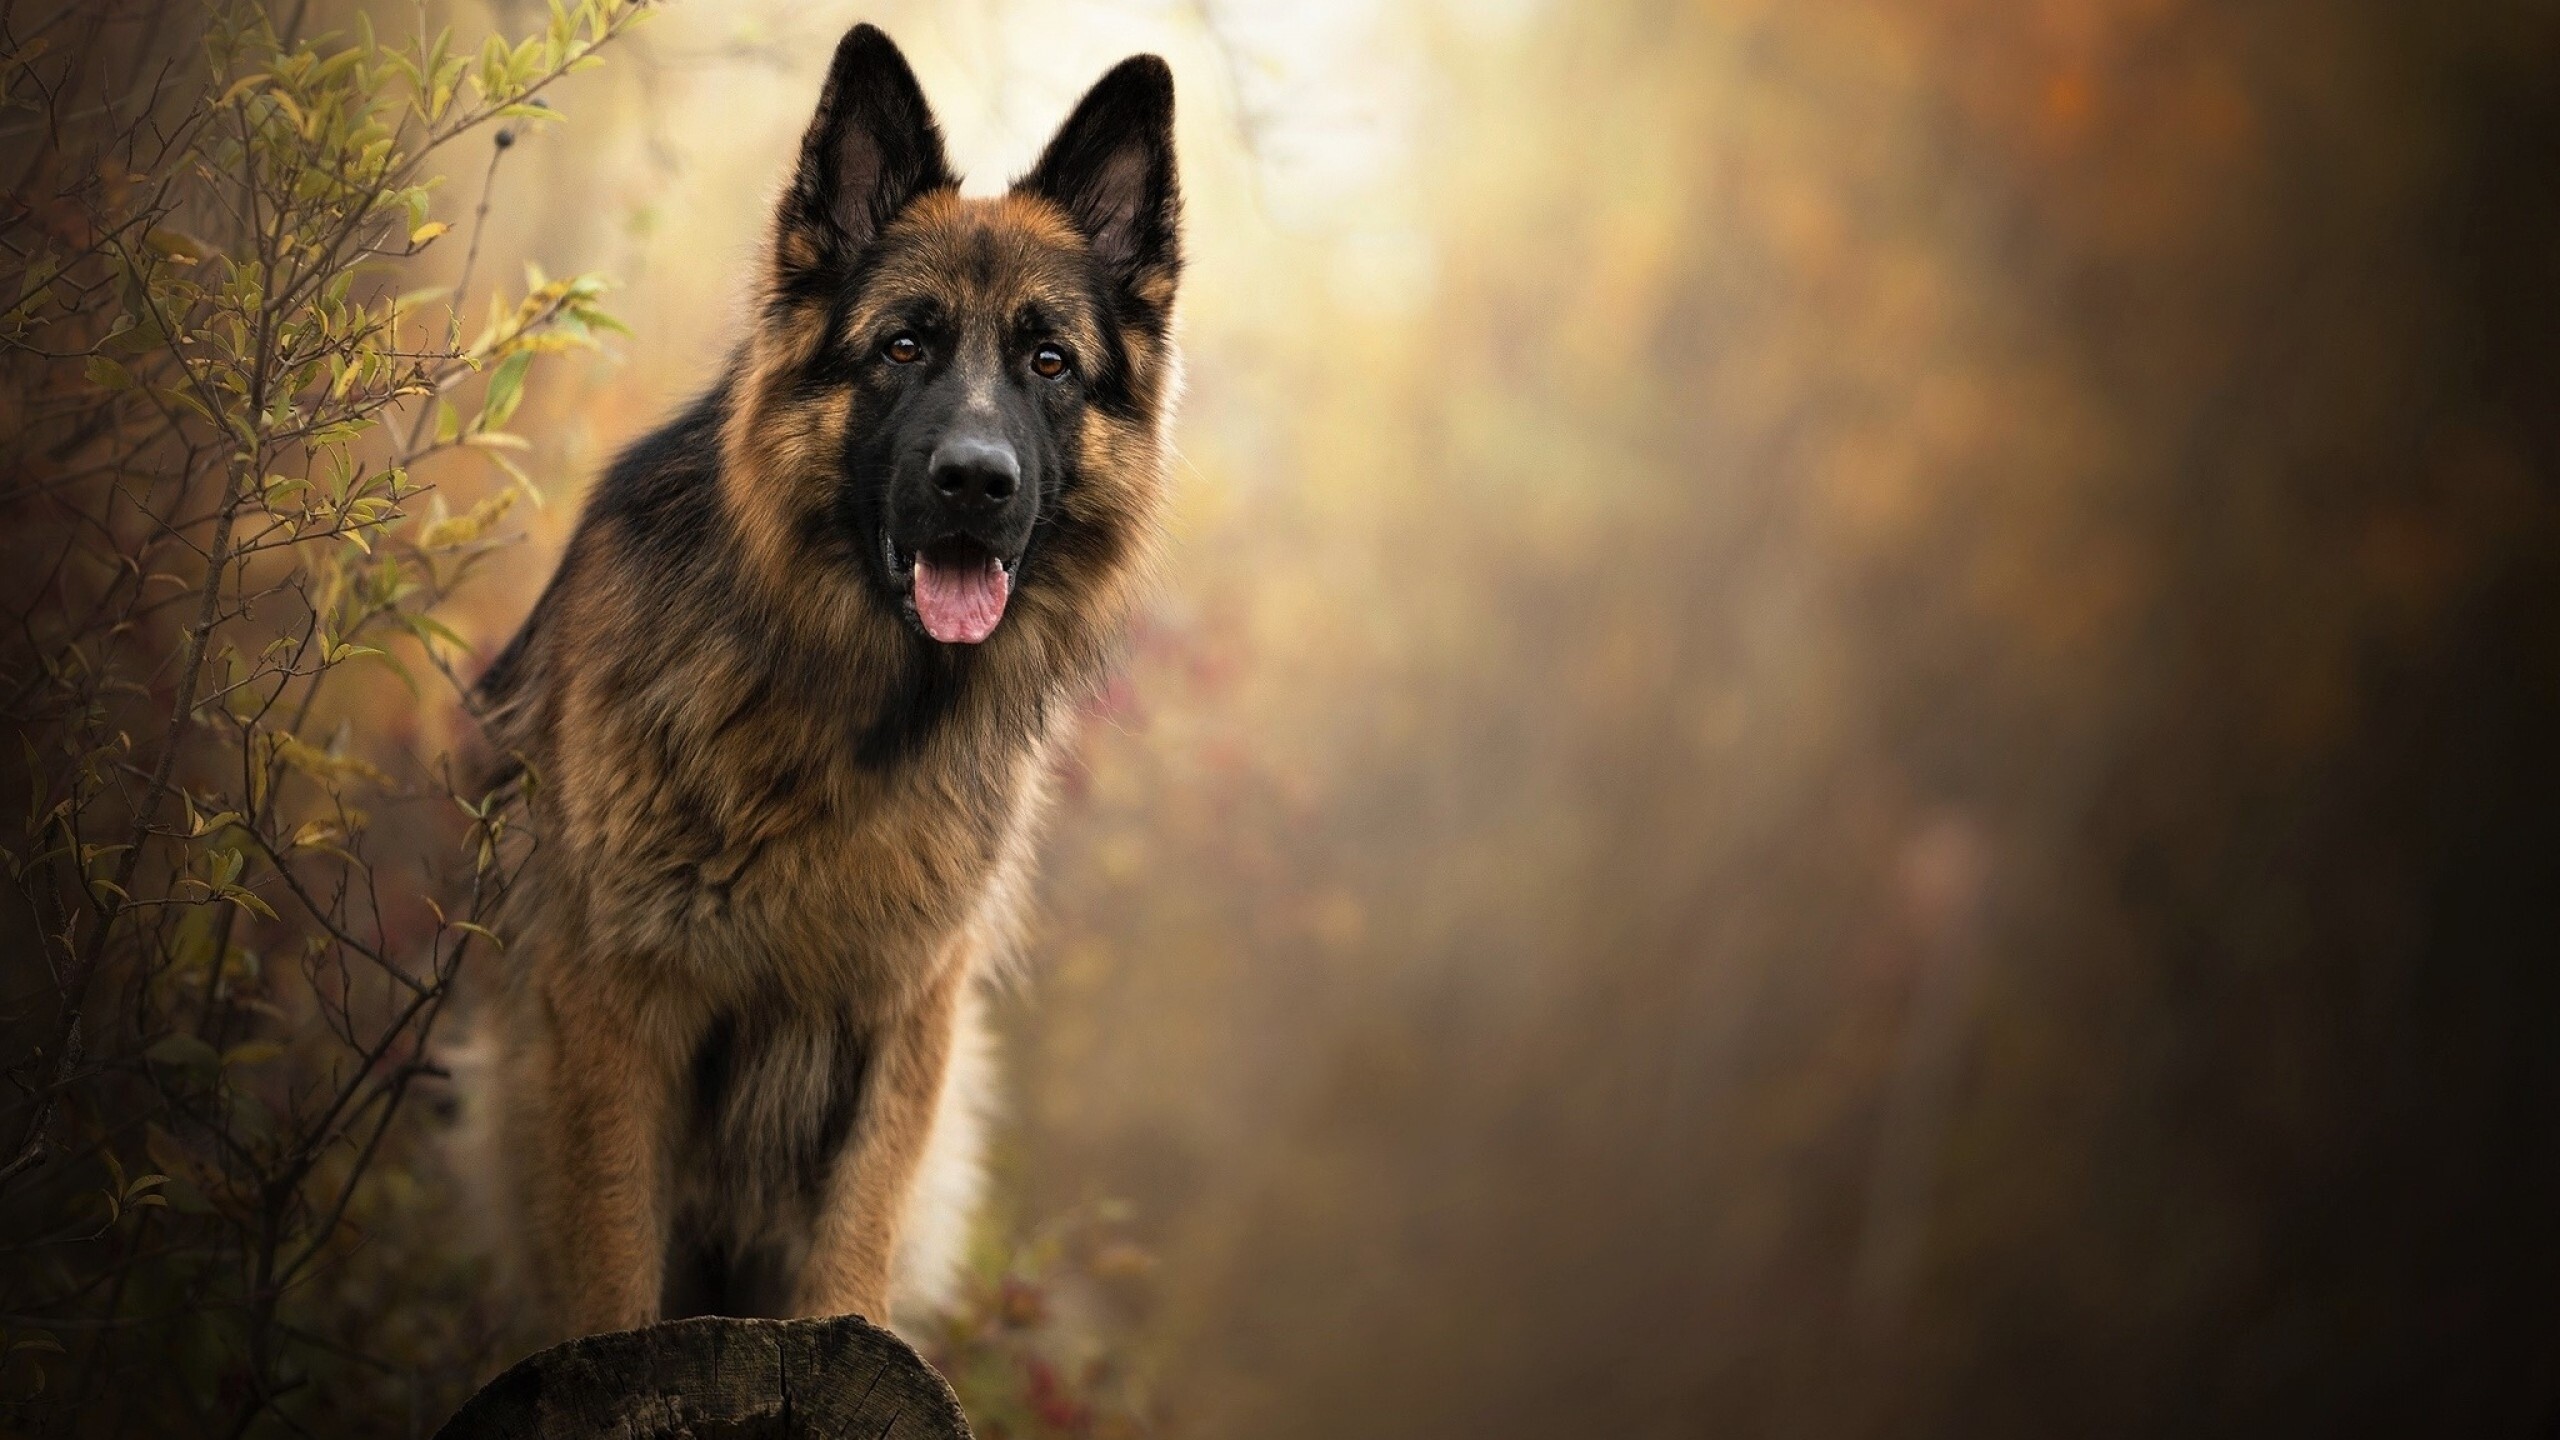 German Shepherd: Dog, Able to quickly learn various tasks and interpret instructions better than other breeds. 2560x1440 HD Wallpaper.